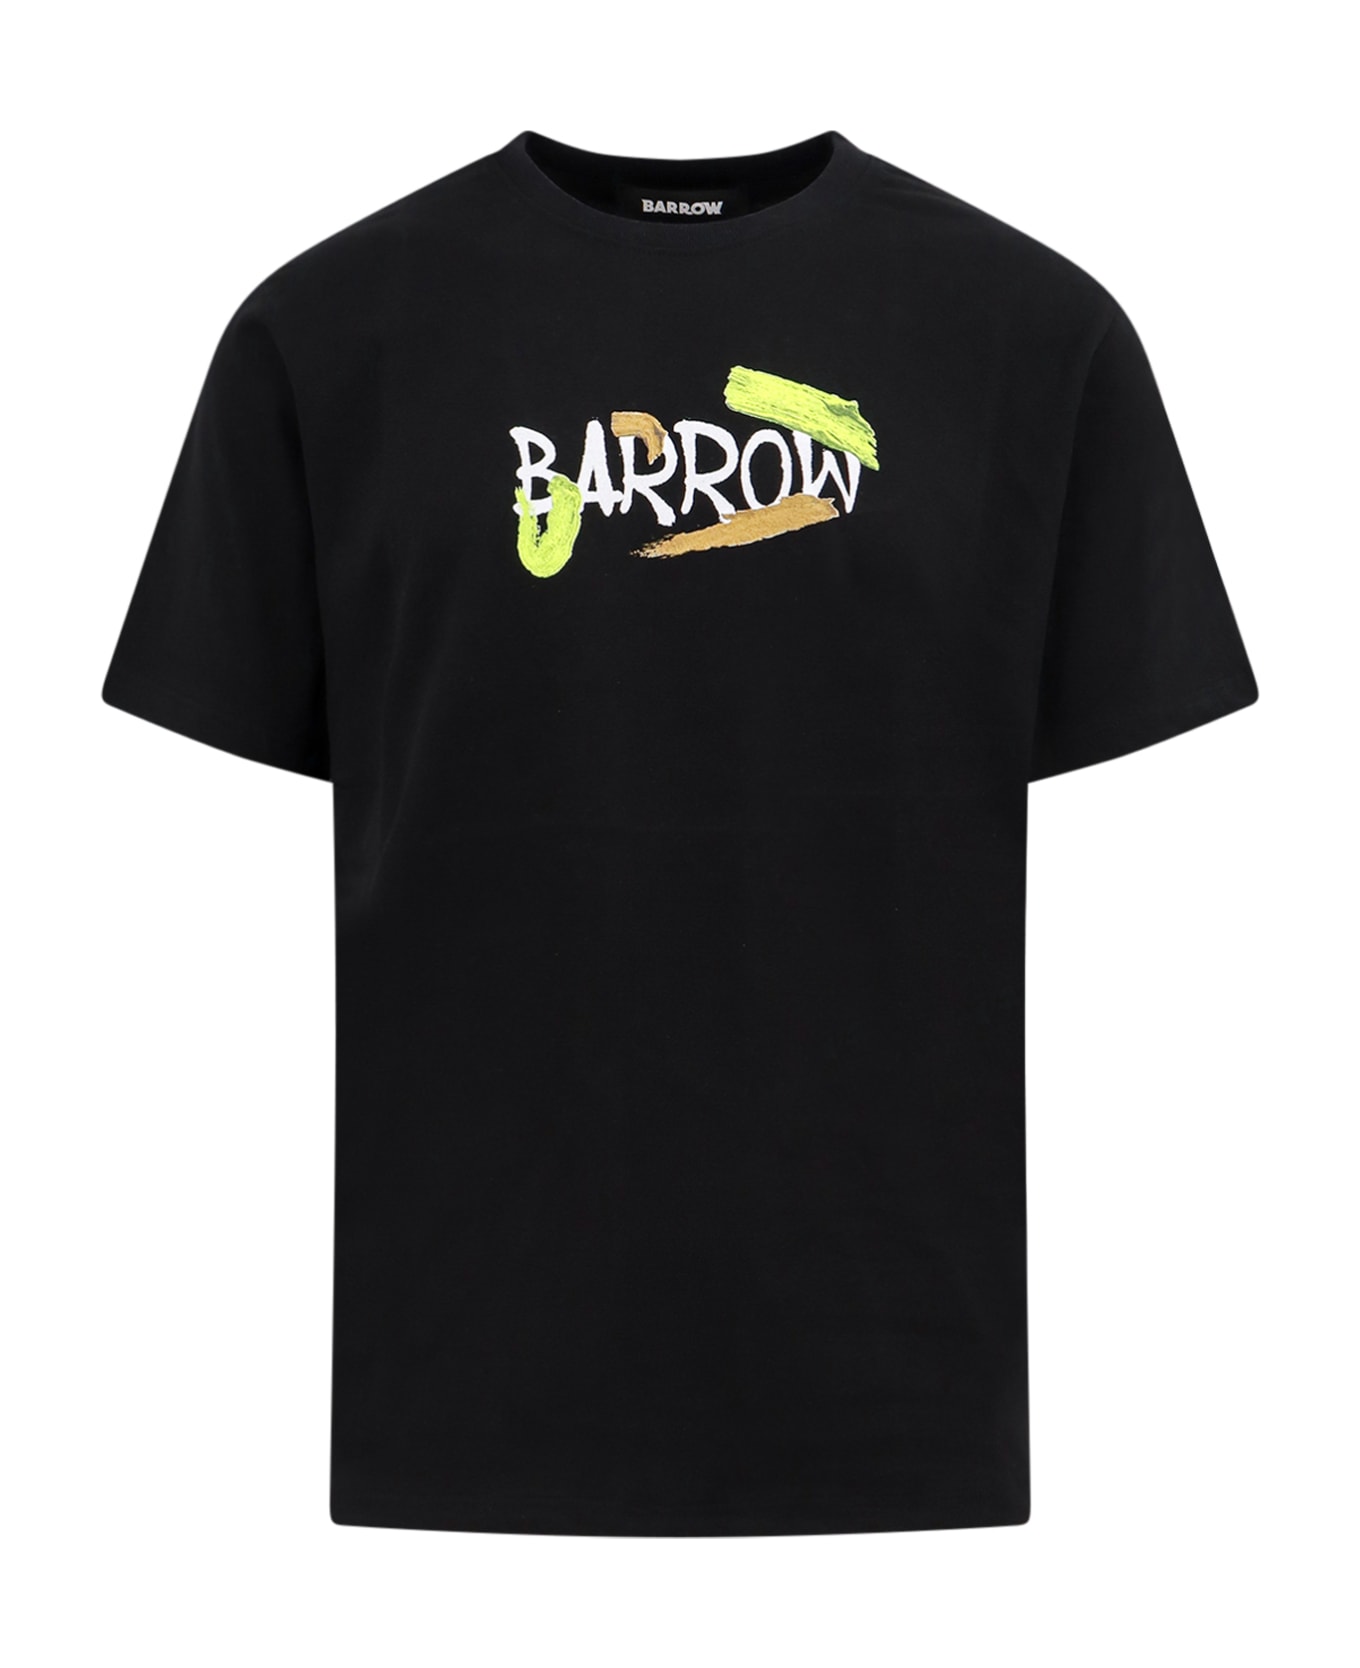 Barrow Black T-shirt With Lettering And Graphic Print - Black